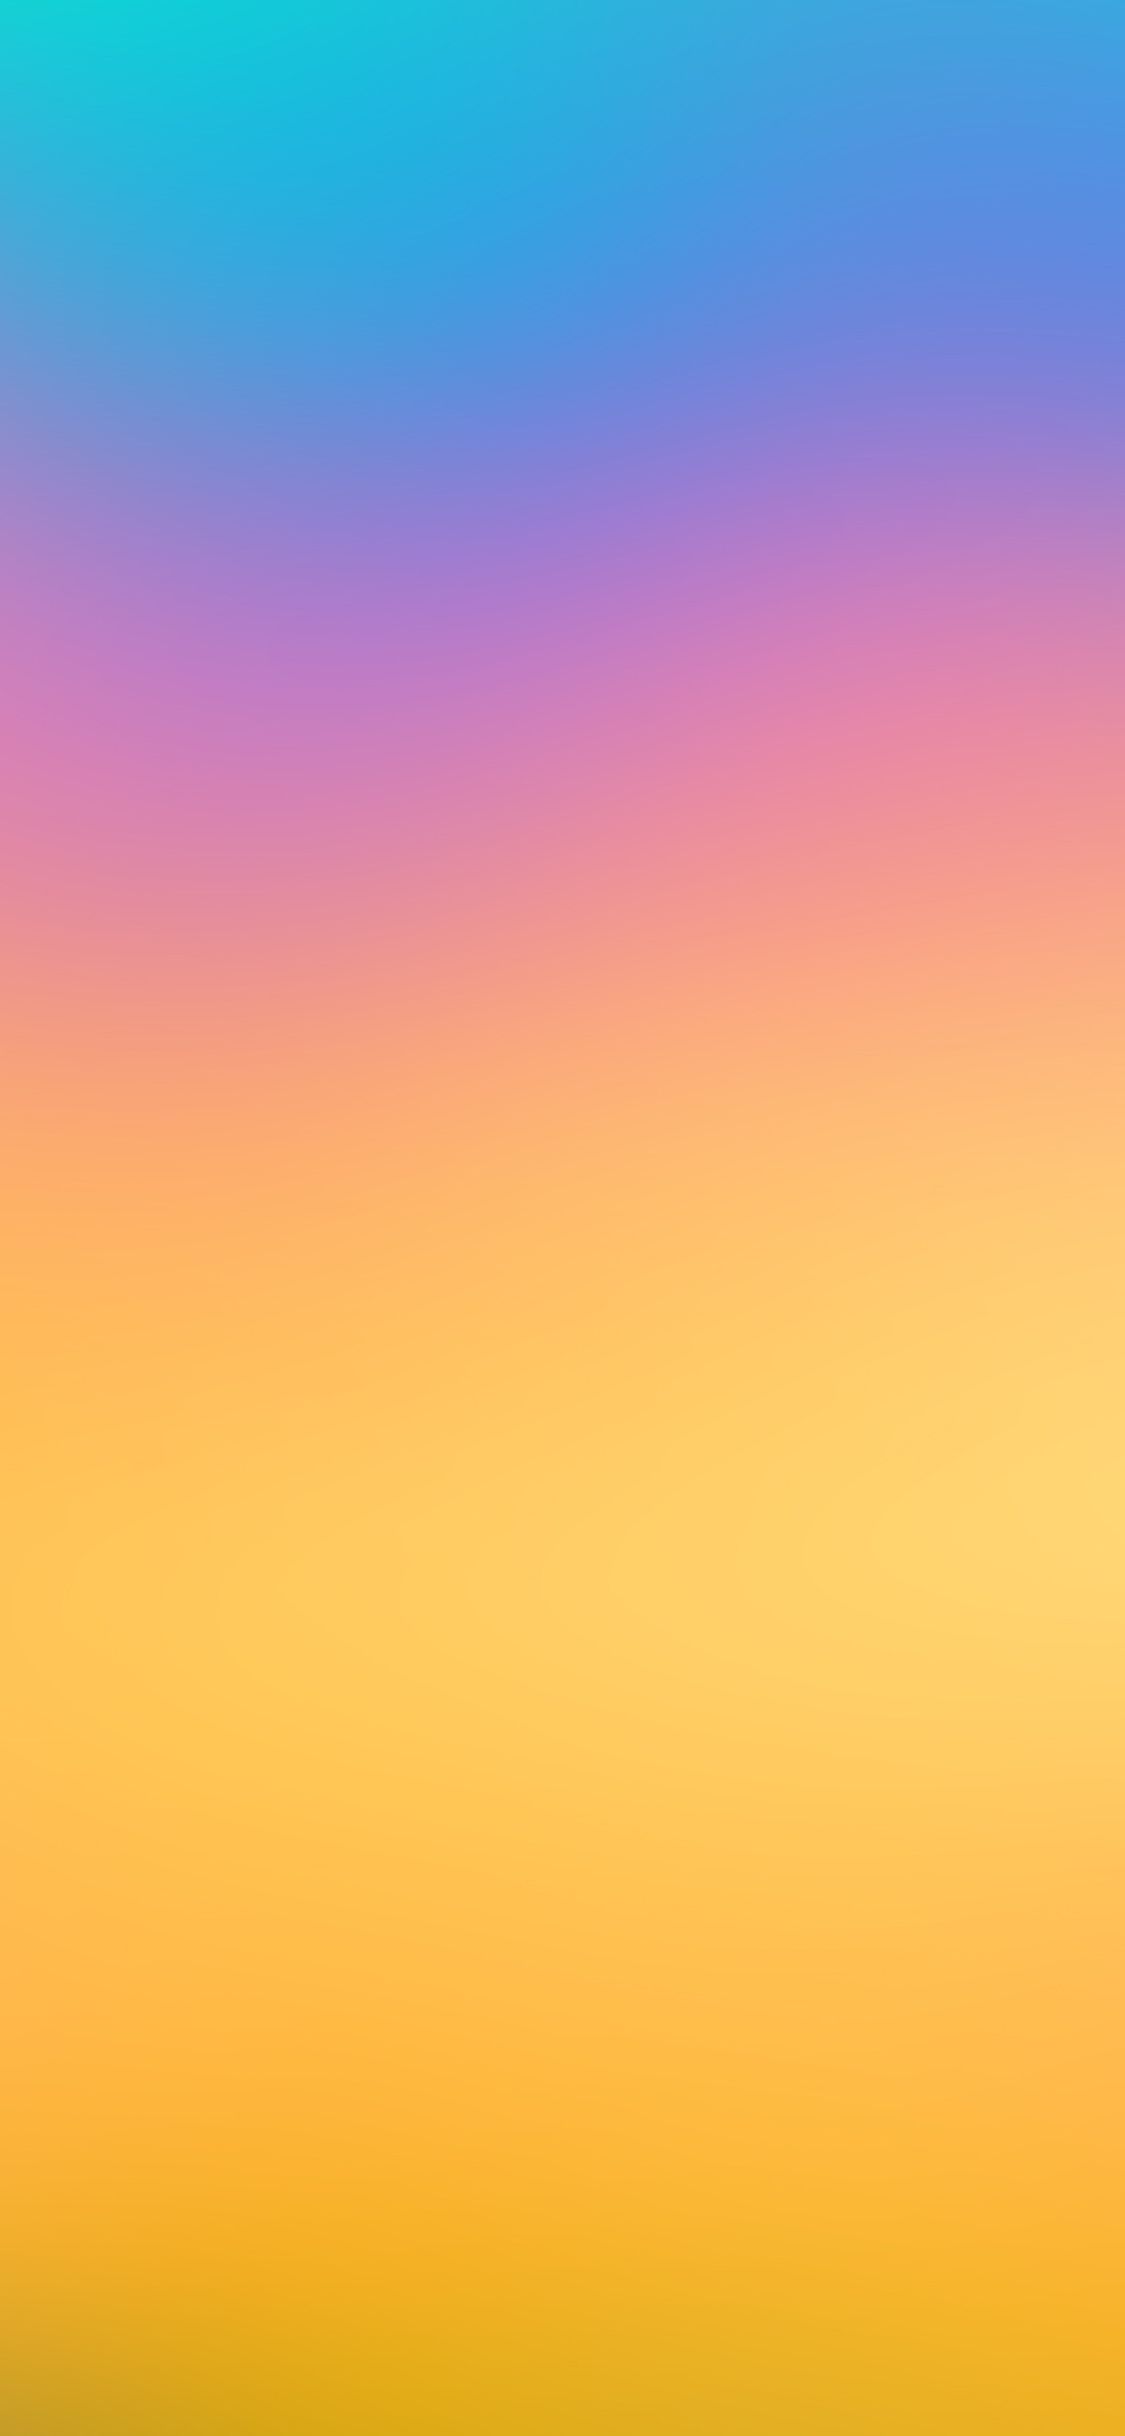 A sunset with a gradient of blue, purple, yellow, and orange. - Bright